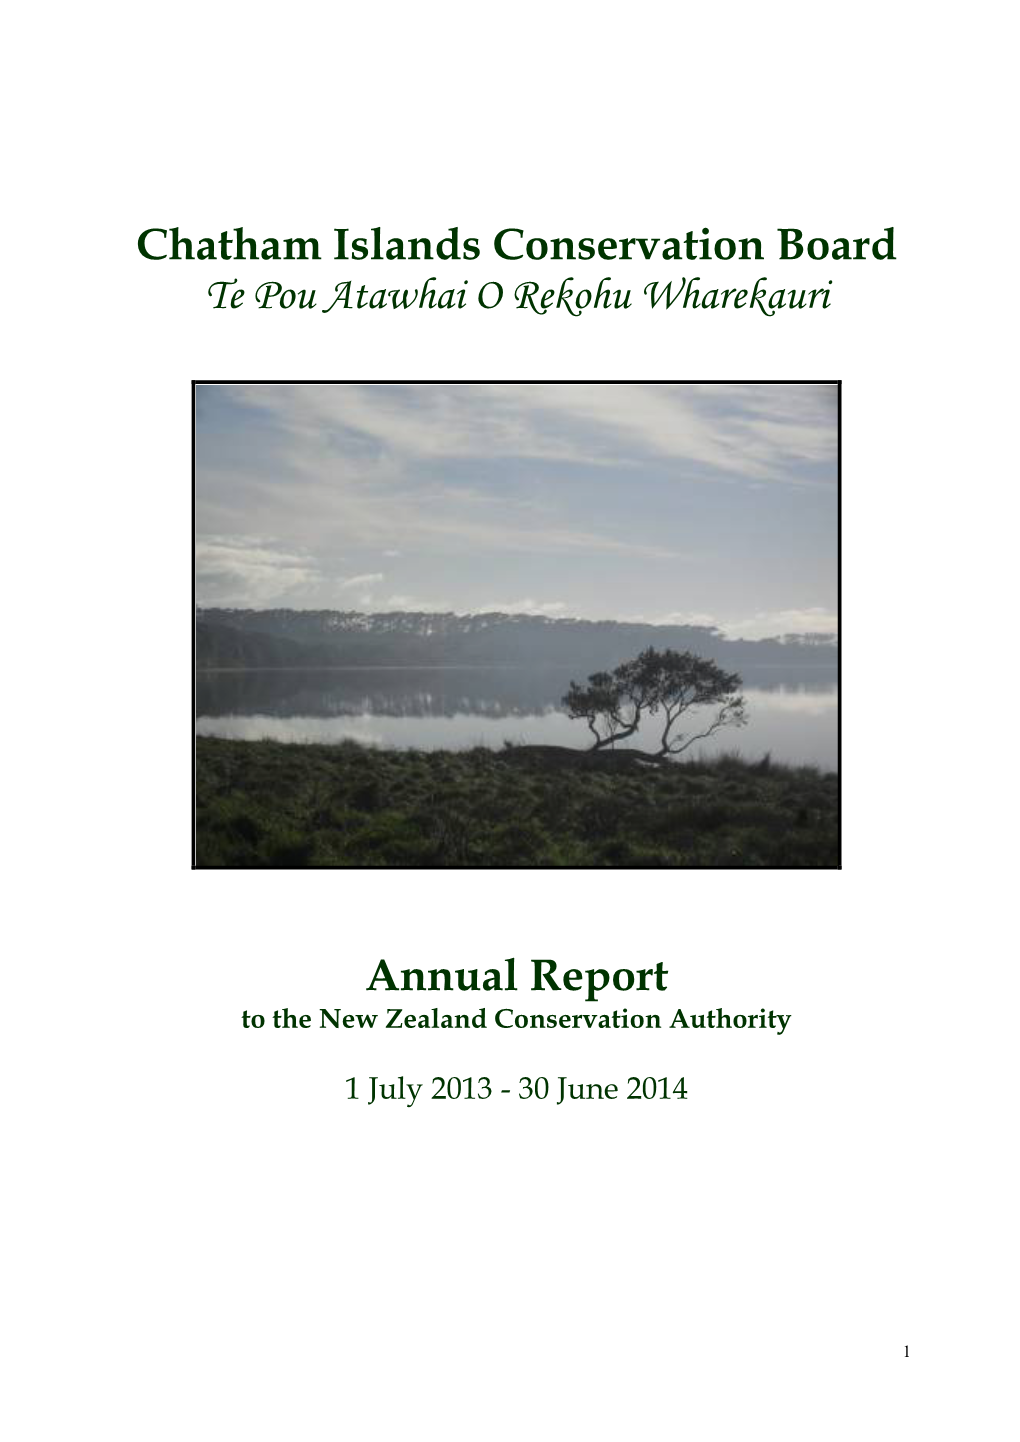 Chatham Islands Conservation Board Annual Report 2013-14